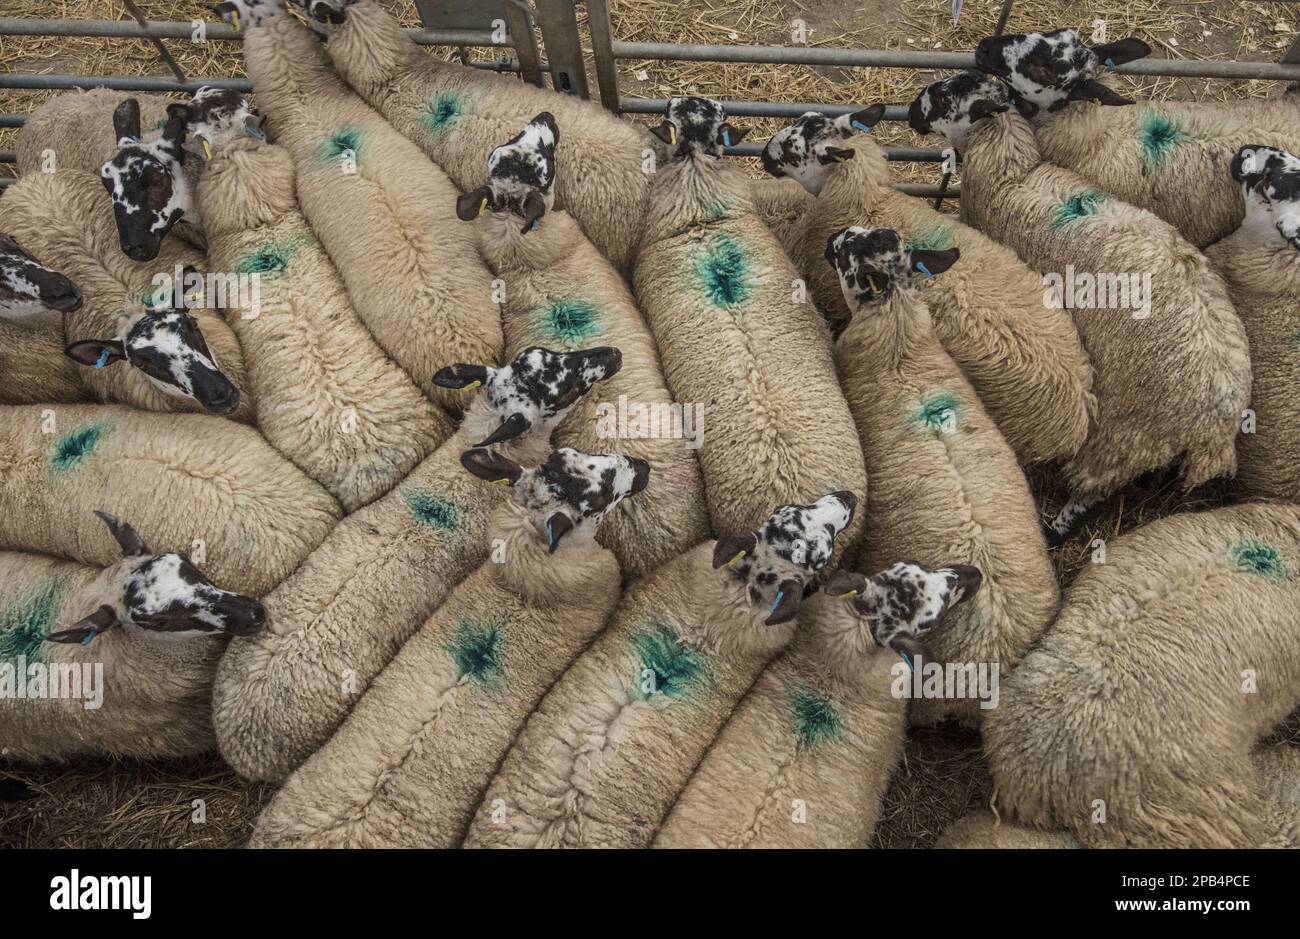 Domestic sheep, domestic animals, ungulates, farm animals (cloven-hoofed animals), mammals, animals, Domestic Sheep, Welsh Mule flock, in pen at lives Stock Photo